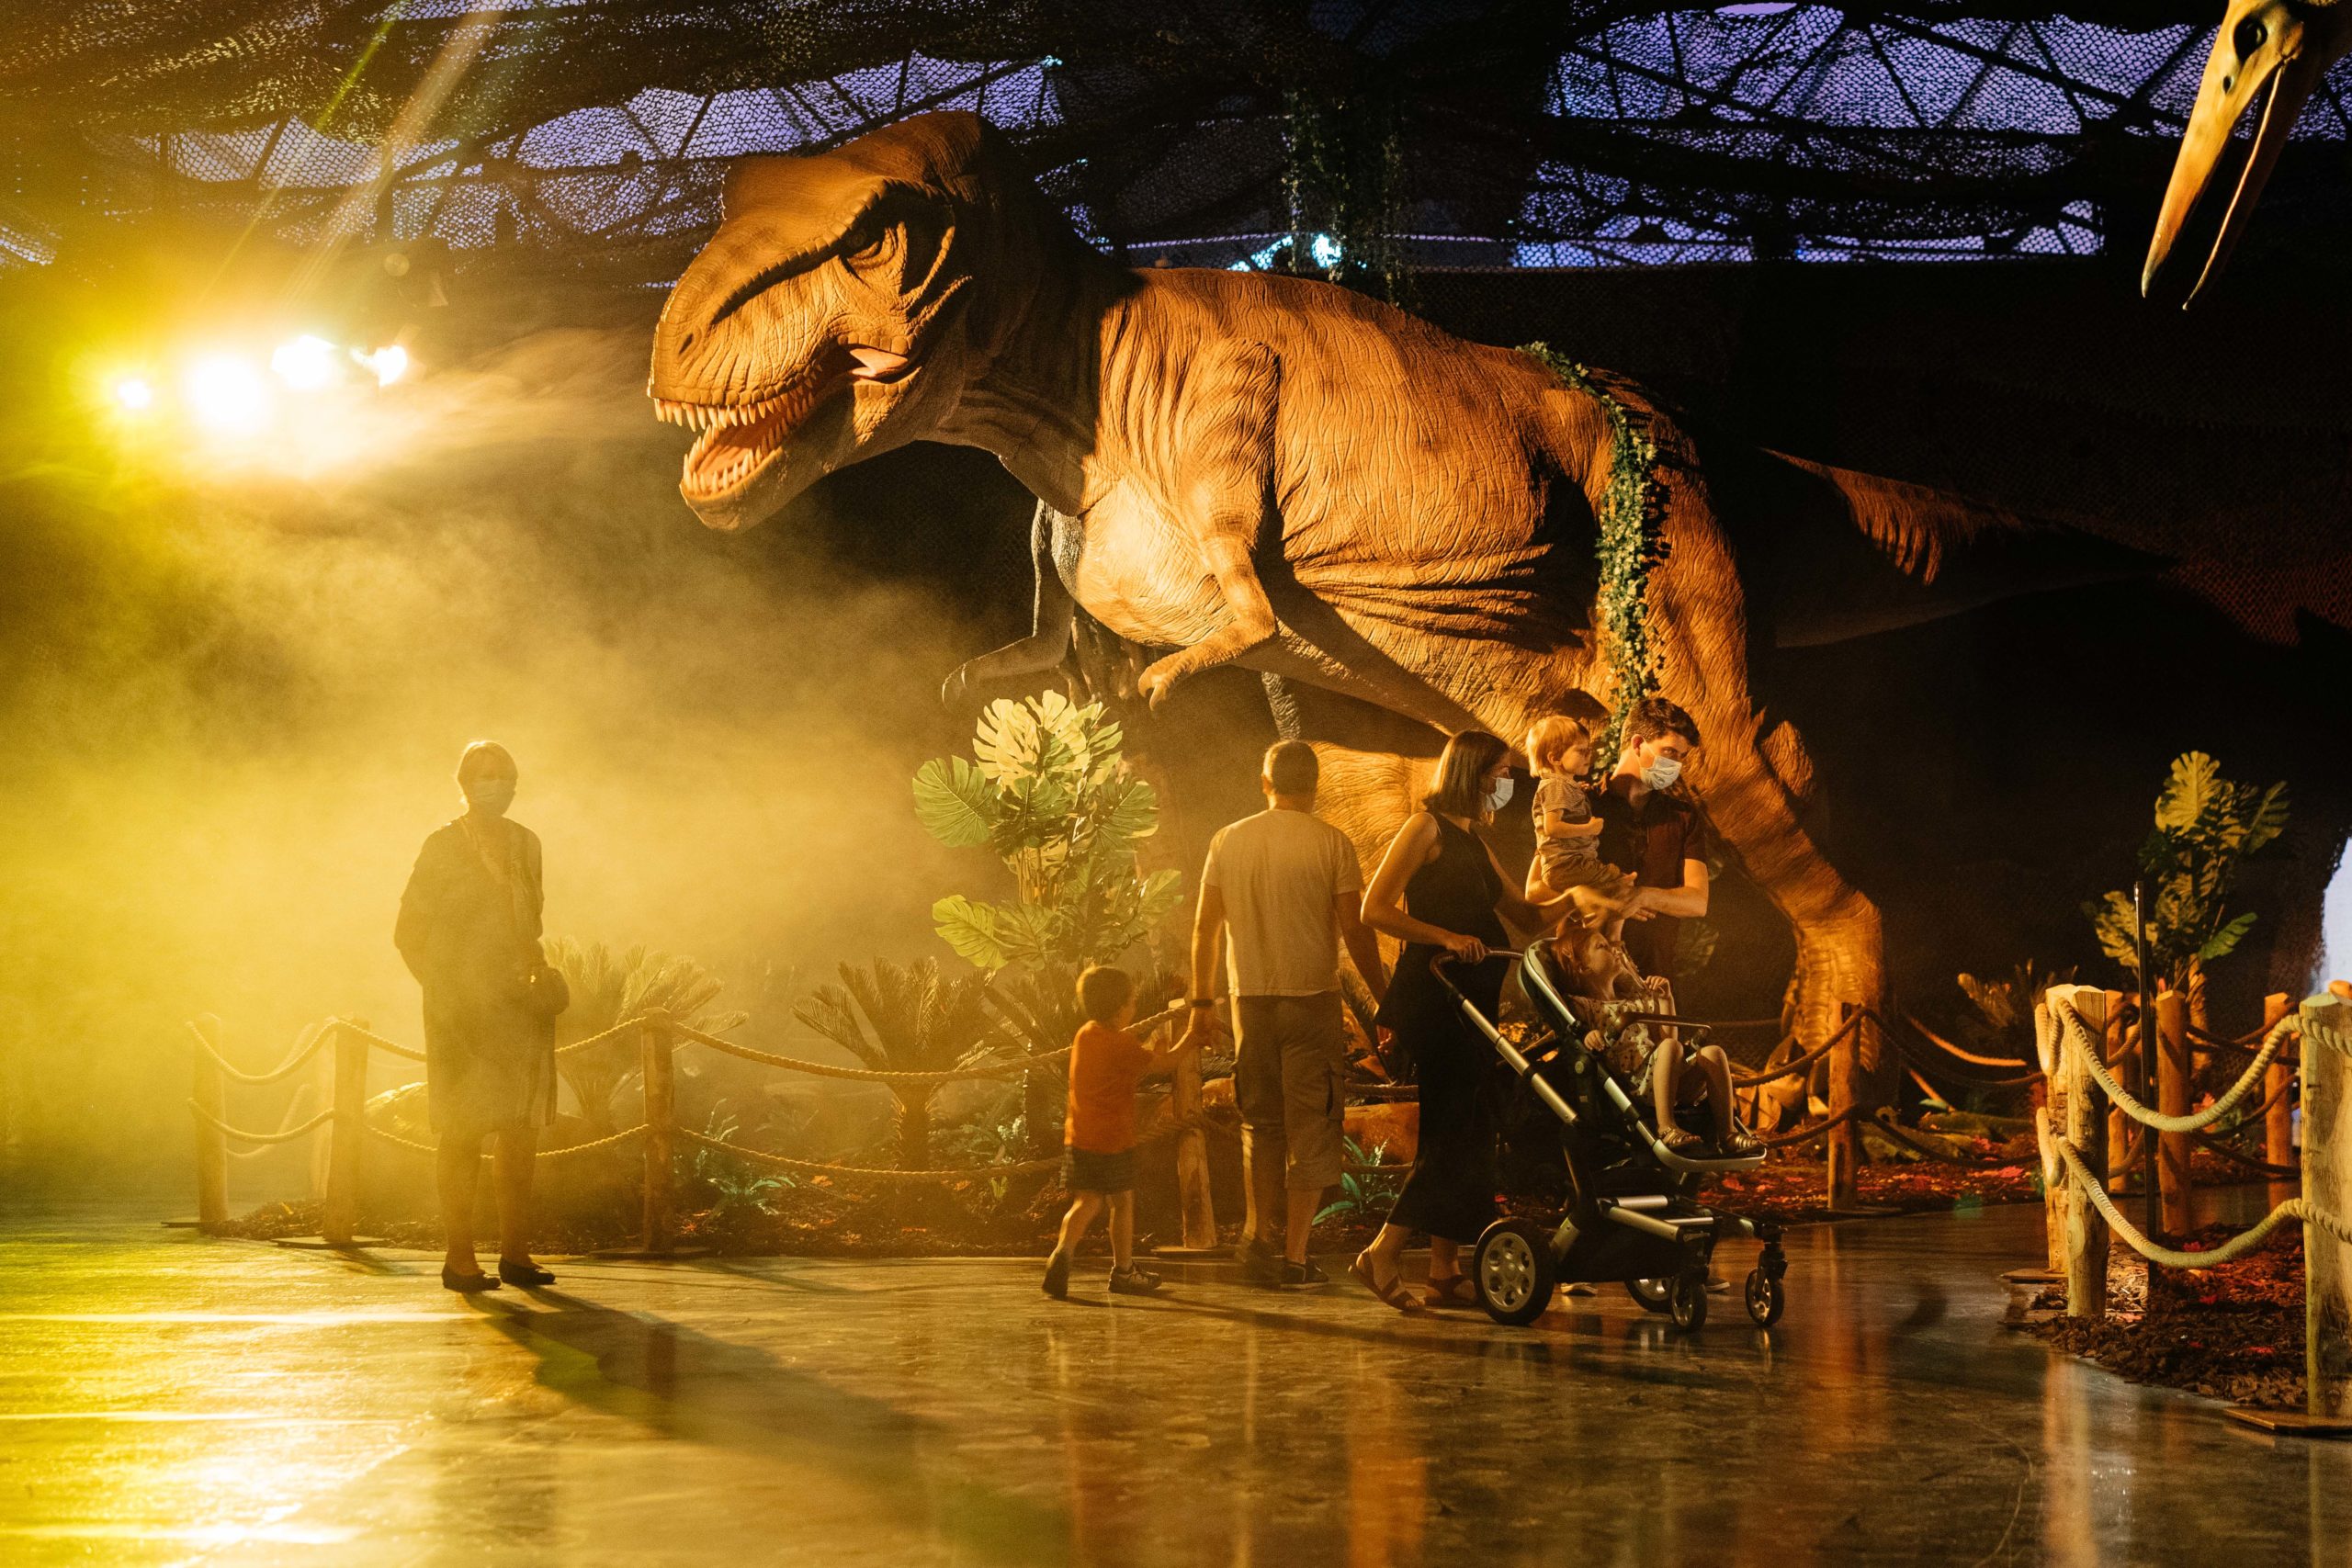 Dinos Alive! is a fun immersive experience for all ages